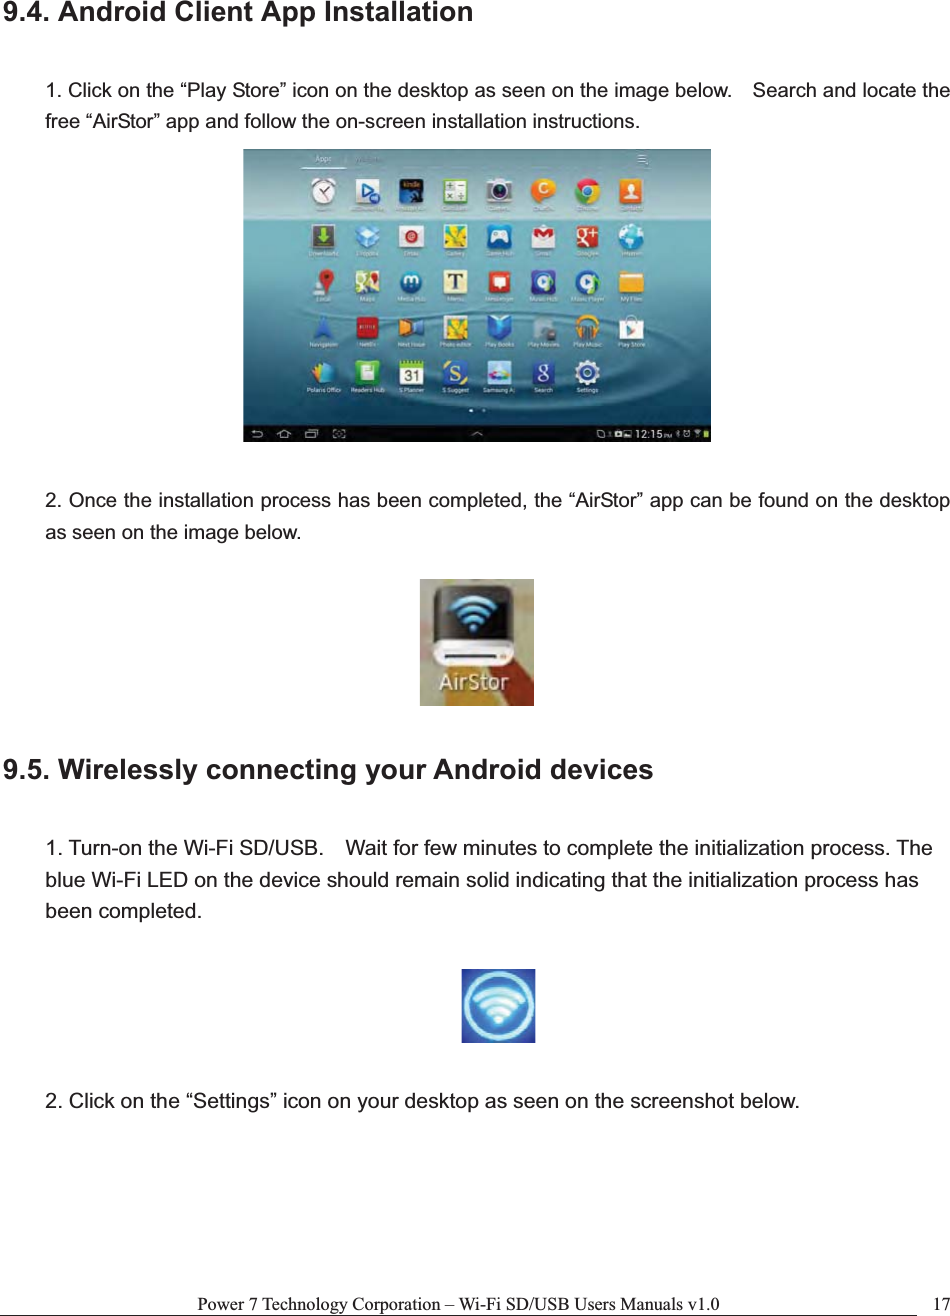 Power 7 Technology Corporation – Wi-Fi SD/USB Users Manuals v1.0  179.4. Android Client App Installation 1. Click on the “Play Store” icon on the desktop as seen on the image below.    Search and locate the free “AirStor” app and follow the on-screen installation instructions. 2. Once the installation process has been completed, the “AirStor” app can be found on the desktop as seen on the image below. 9.5. Wirelessly connecting your Android devices 1. Turn-on the Wi-Fi SD/USB.    Wait for few minutes to complete the initialization process. The blue Wi-Fi LED on the device should remain solid indicating that the initialization process has been completed. 2. Click on the “Settings” icon on your desktop as seen on the screenshot below. 